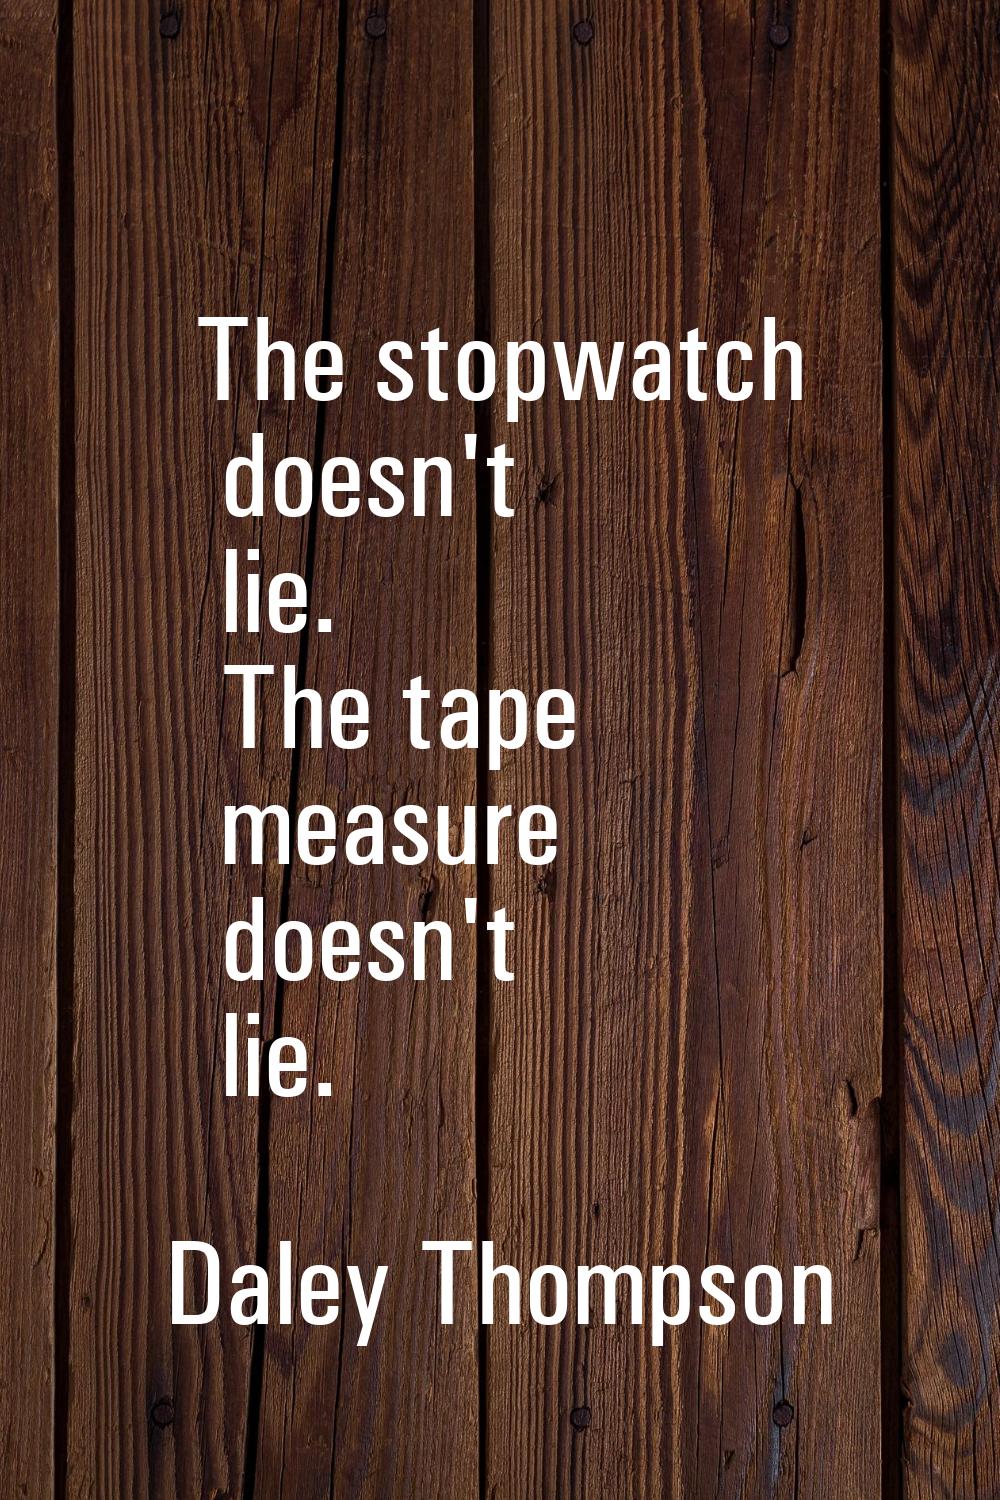 The stopwatch doesn't lie. The tape measure doesn't lie.